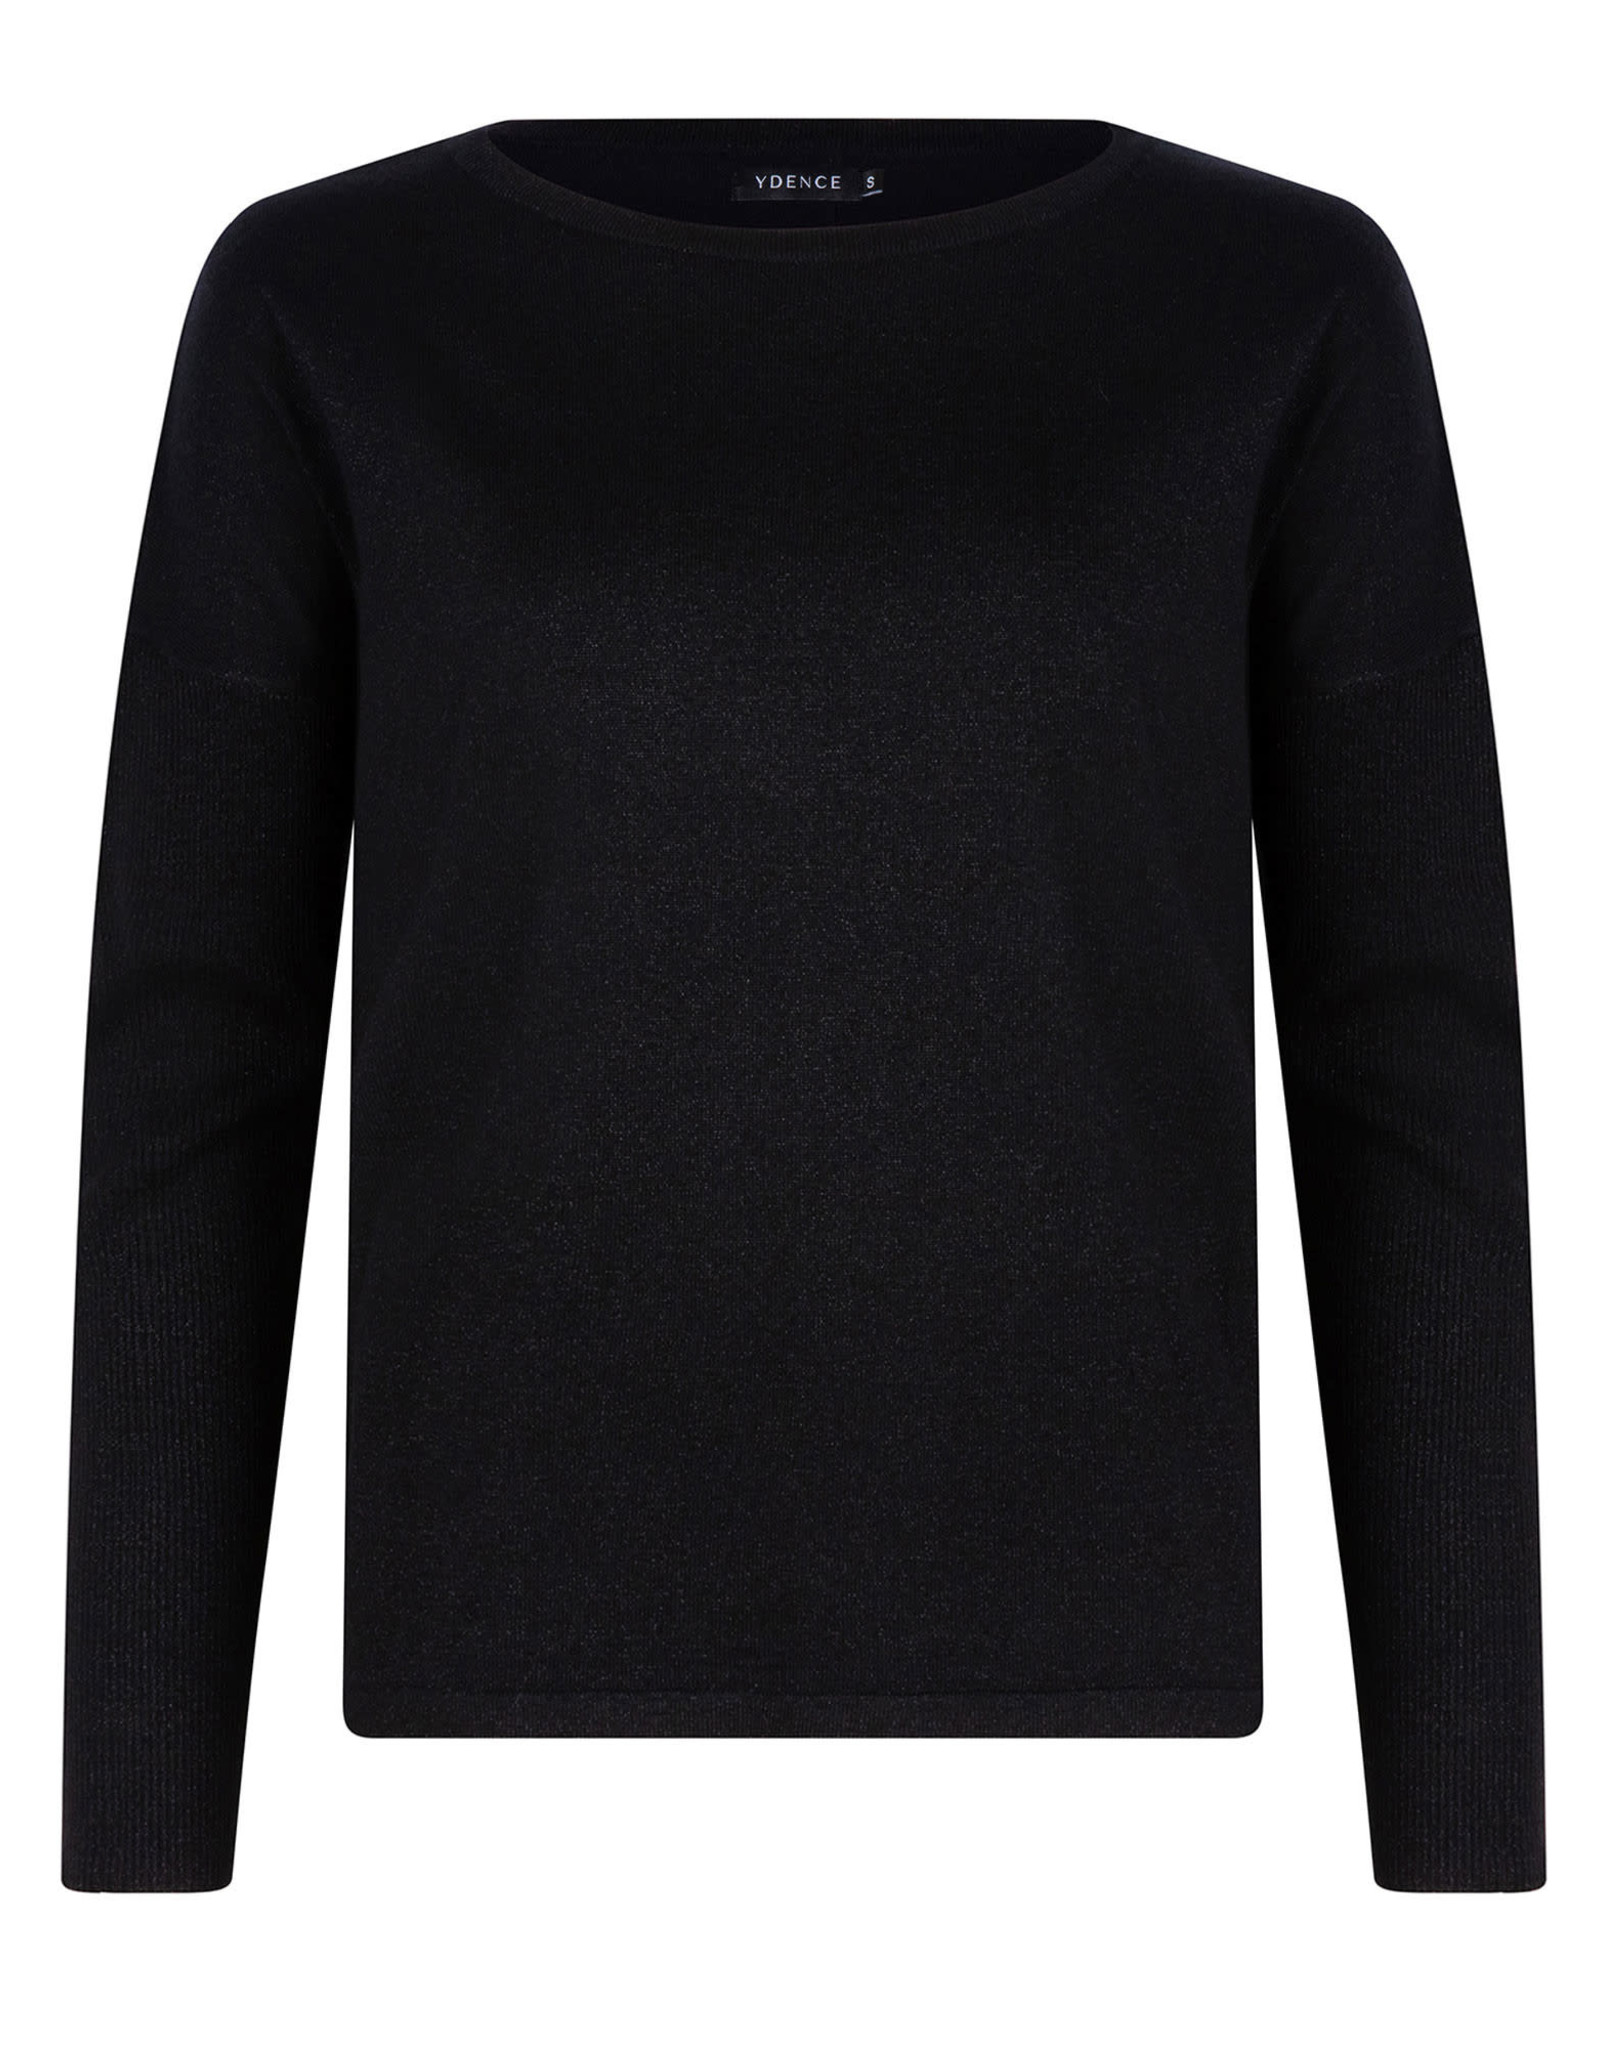 YDENCE Knitted top Lani - Black